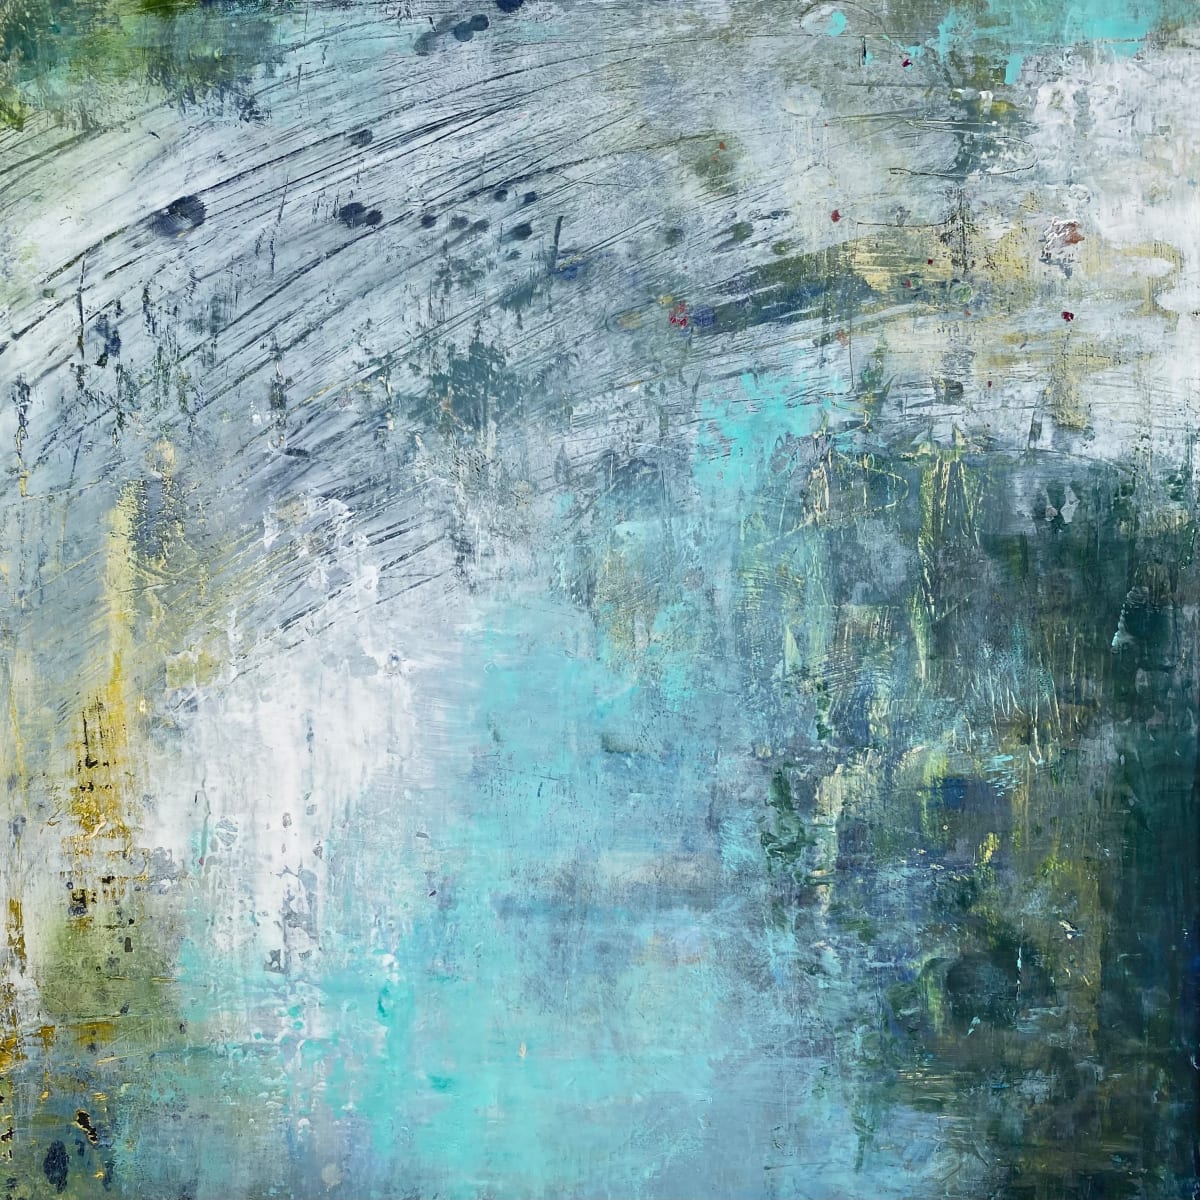 Water Garden I by Claire Hankey  Image: An atmospheric, oil and cold wax painting inspired by reflections in water.